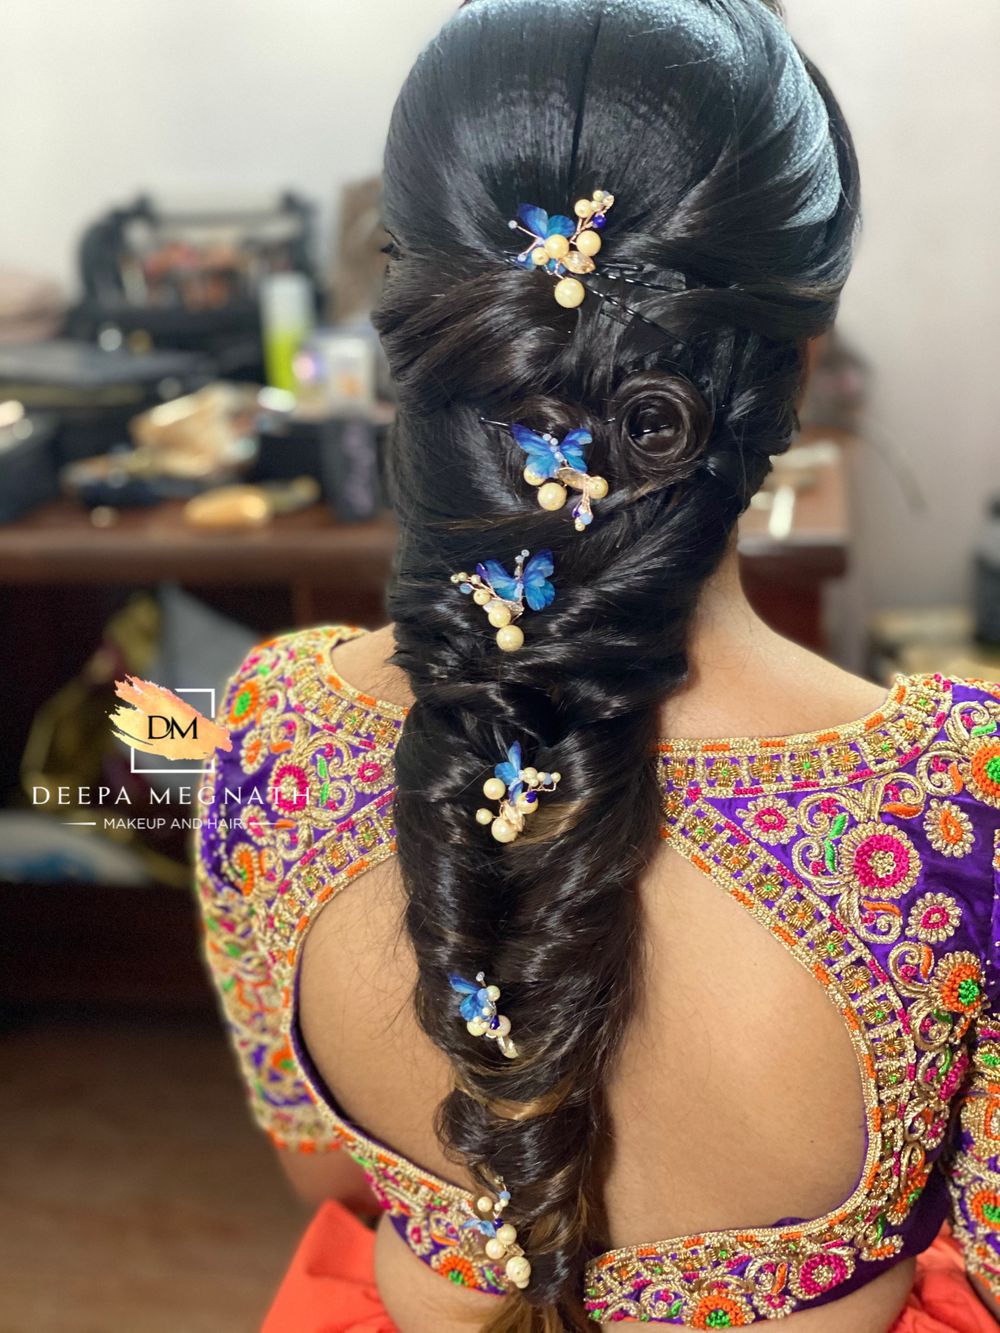 Photo From Team Deepa Megnath hairstyles - By Makeup by Deepa Megnath